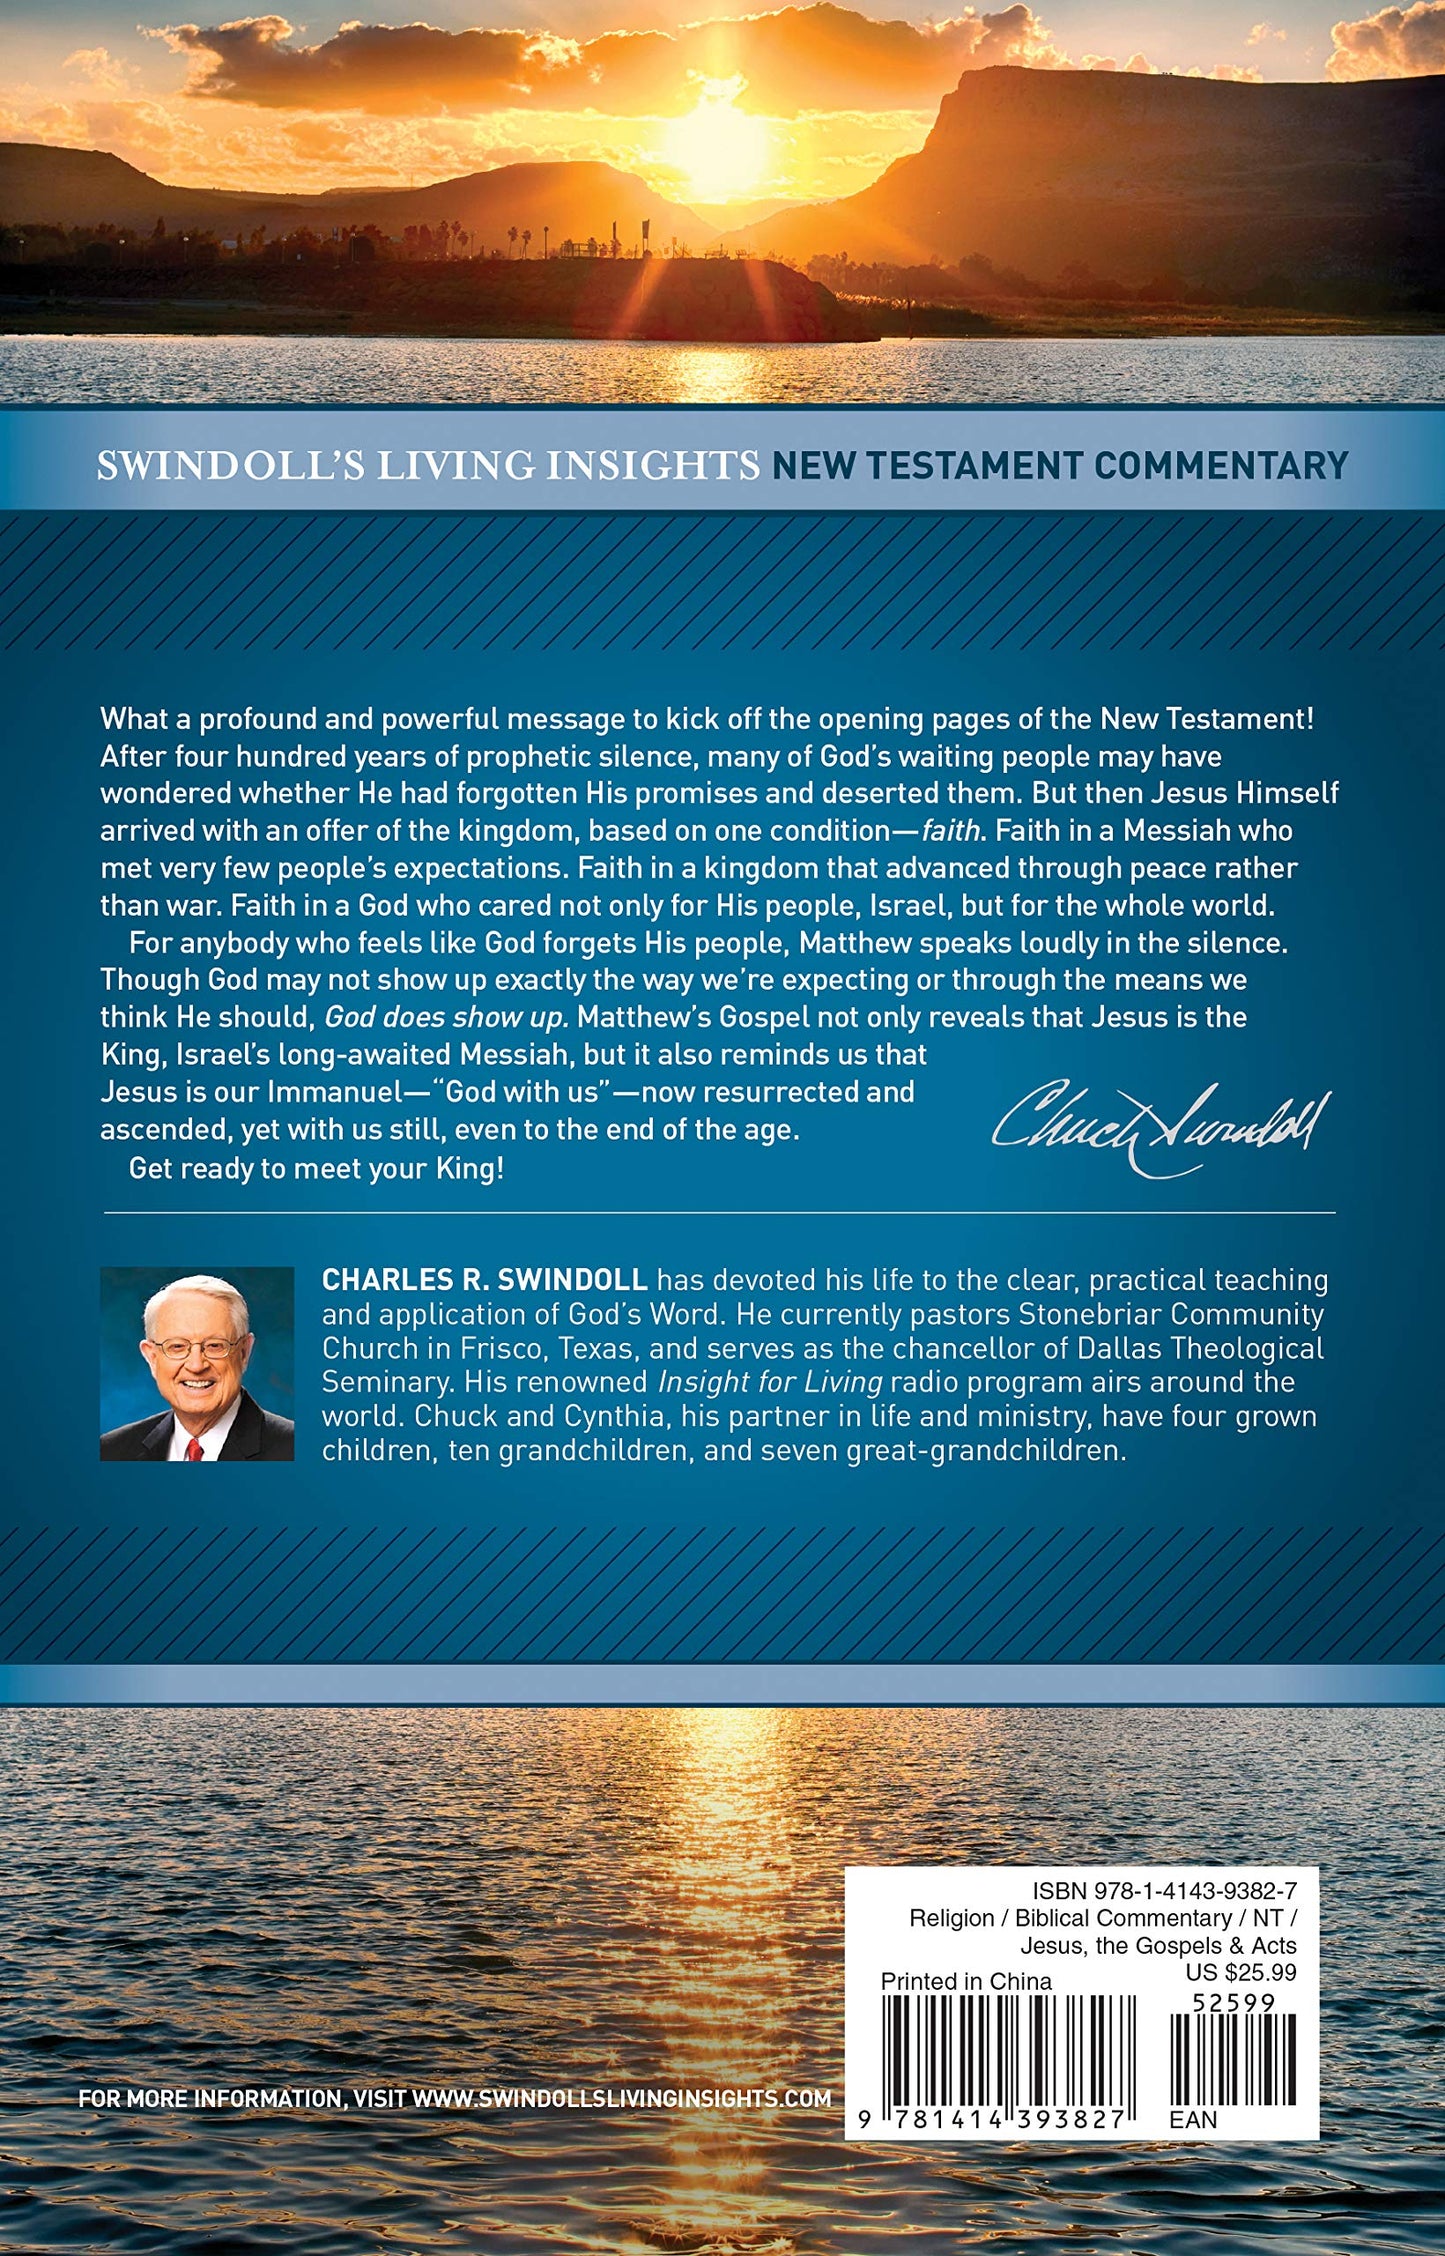 Insights on Matthew 1--15 (Swindoll's Living Insights New Testament Commentary)